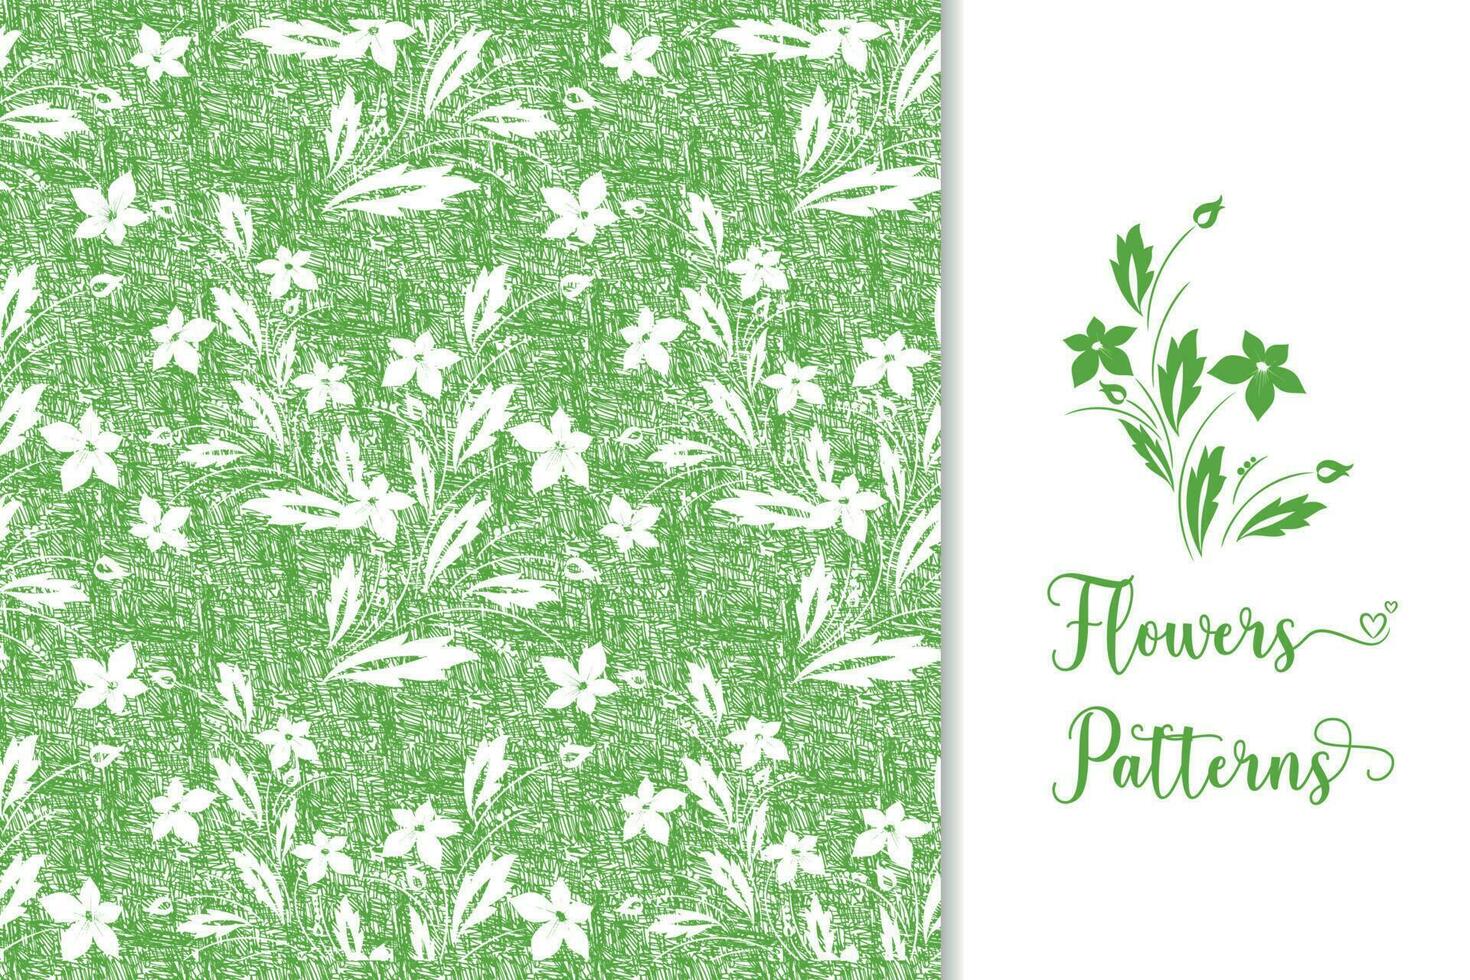 Colored flowers Pattern Botanical Design for Print and Graphic Projects. This botanical design features a colored flowers pattern and is perfect for print, graphic design, and home decor projects. vector